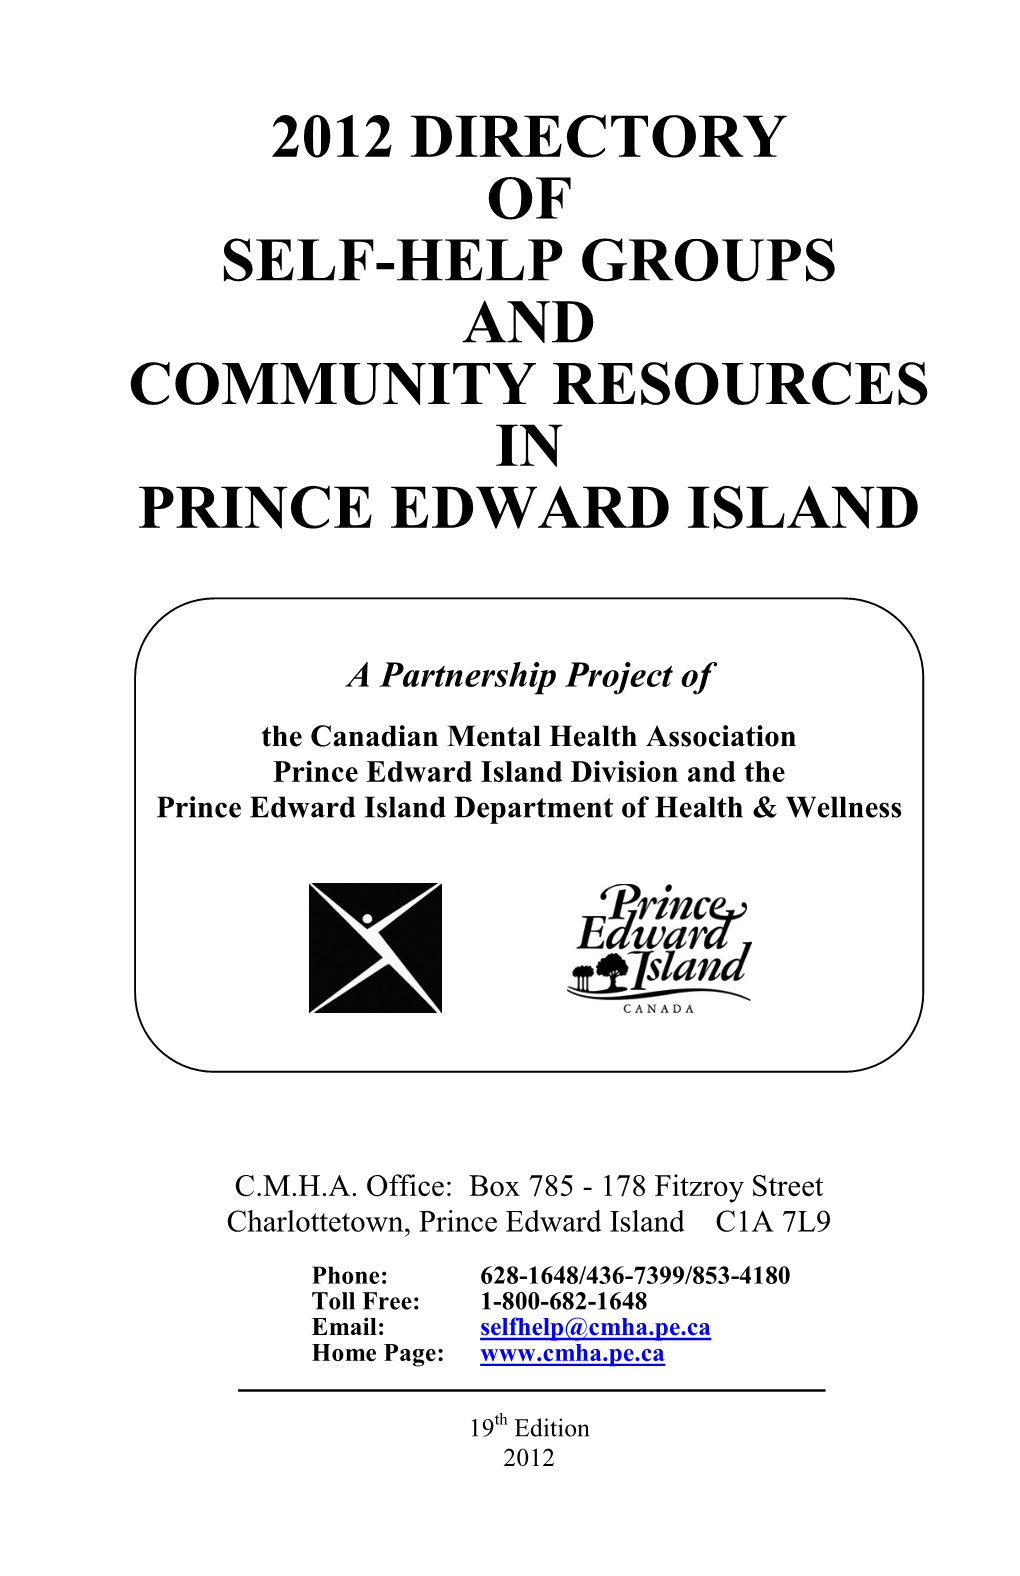 2012 Directory of Self-Help Groups and Community Resources in Prince Edward Island